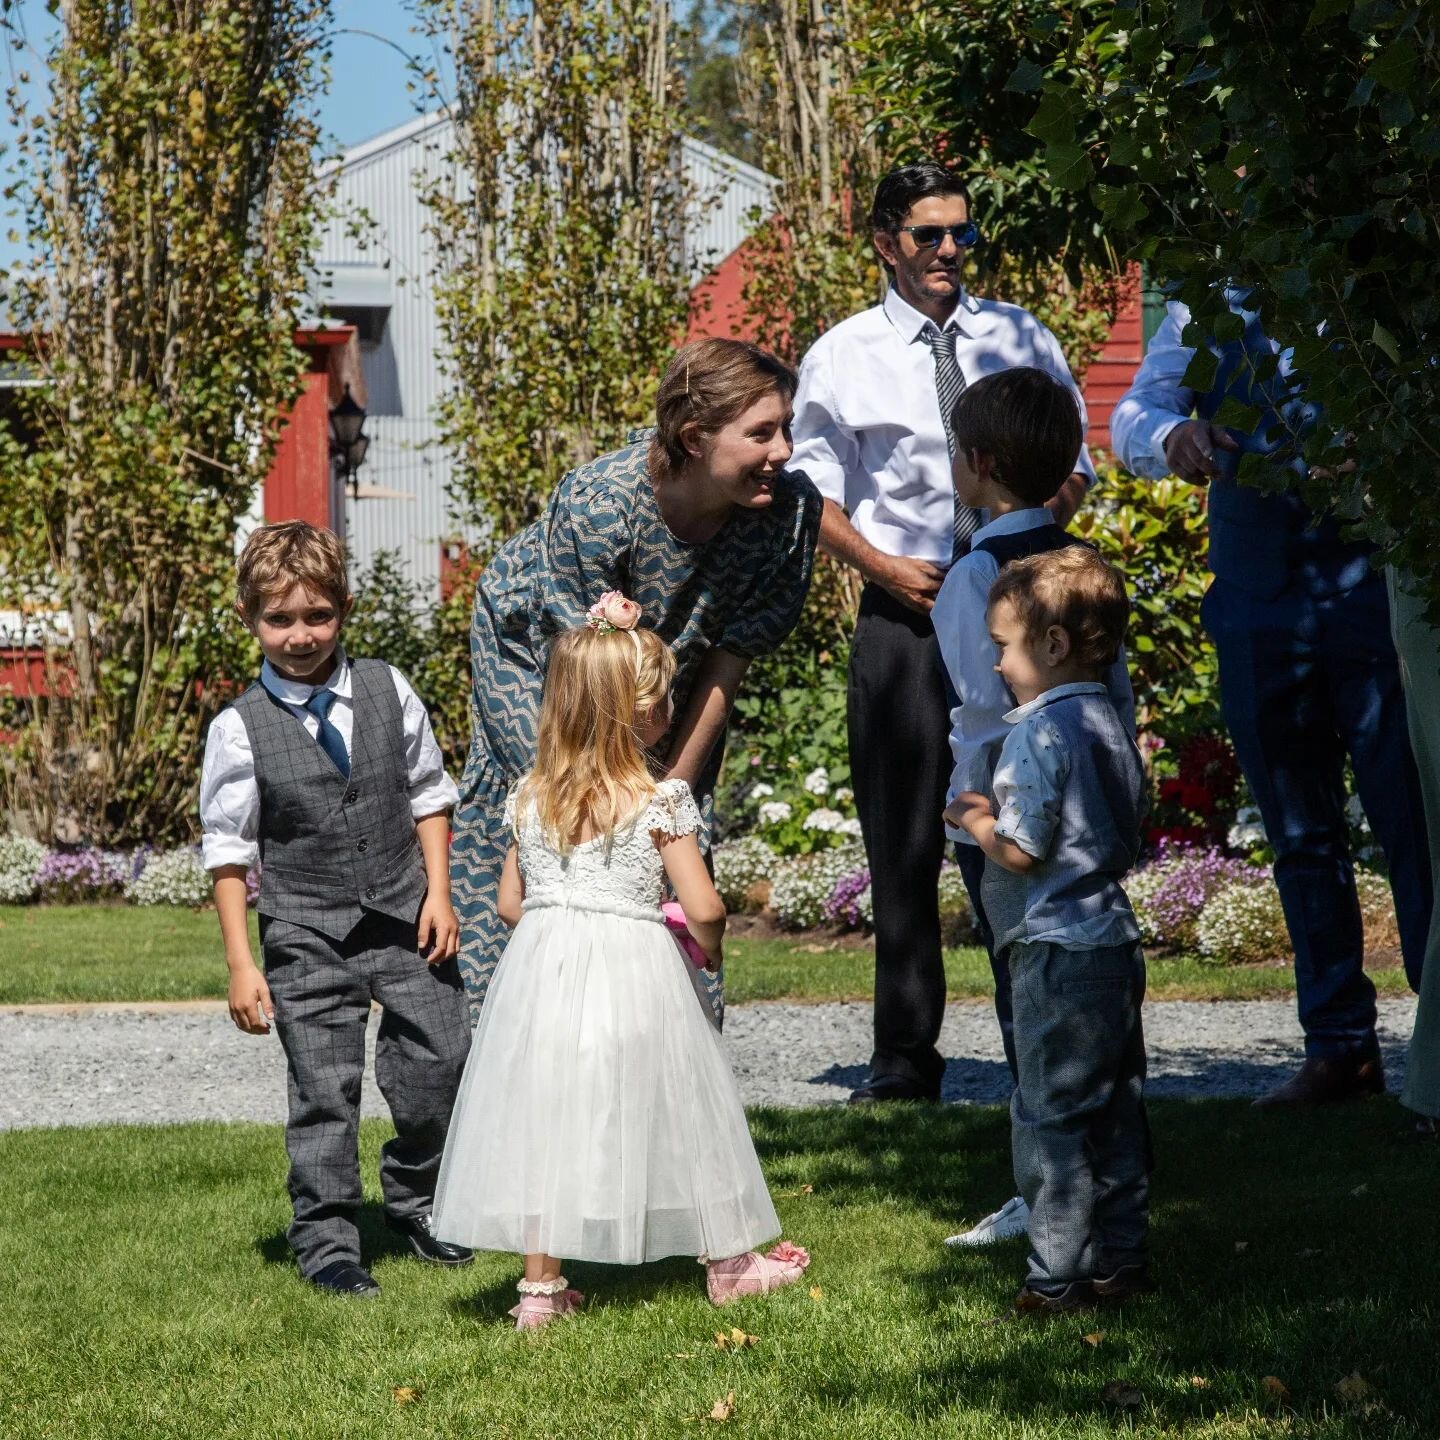 As a māmā and a primary school teacher, I love tiny humans 💕 

I will make sure they know what's happening - what the ceremony will look and sound like, where everyone will be, and what they need to do. 

I have a bunch of handy tips... like, have t